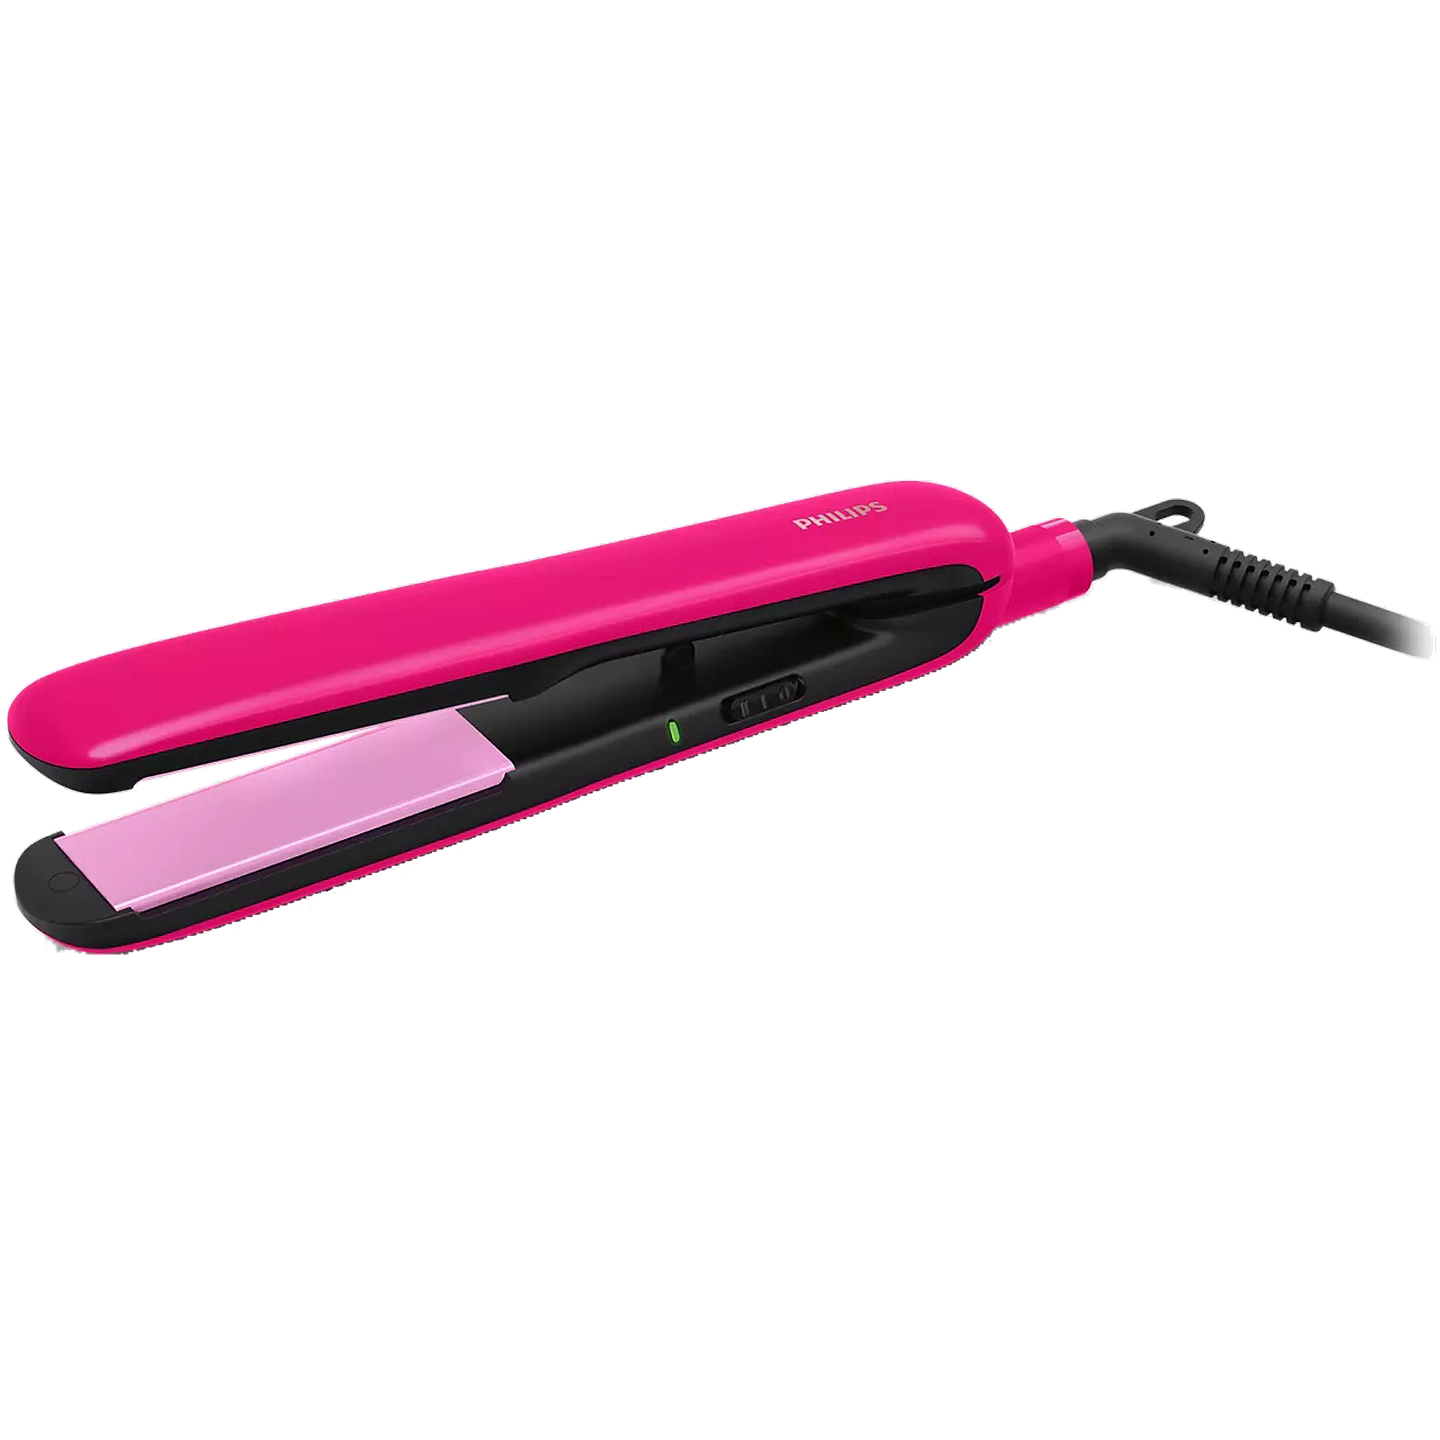 Philips 2000 Series Corded Straightener (SilkProtect Technology, BHS393/00, Bright Pink)